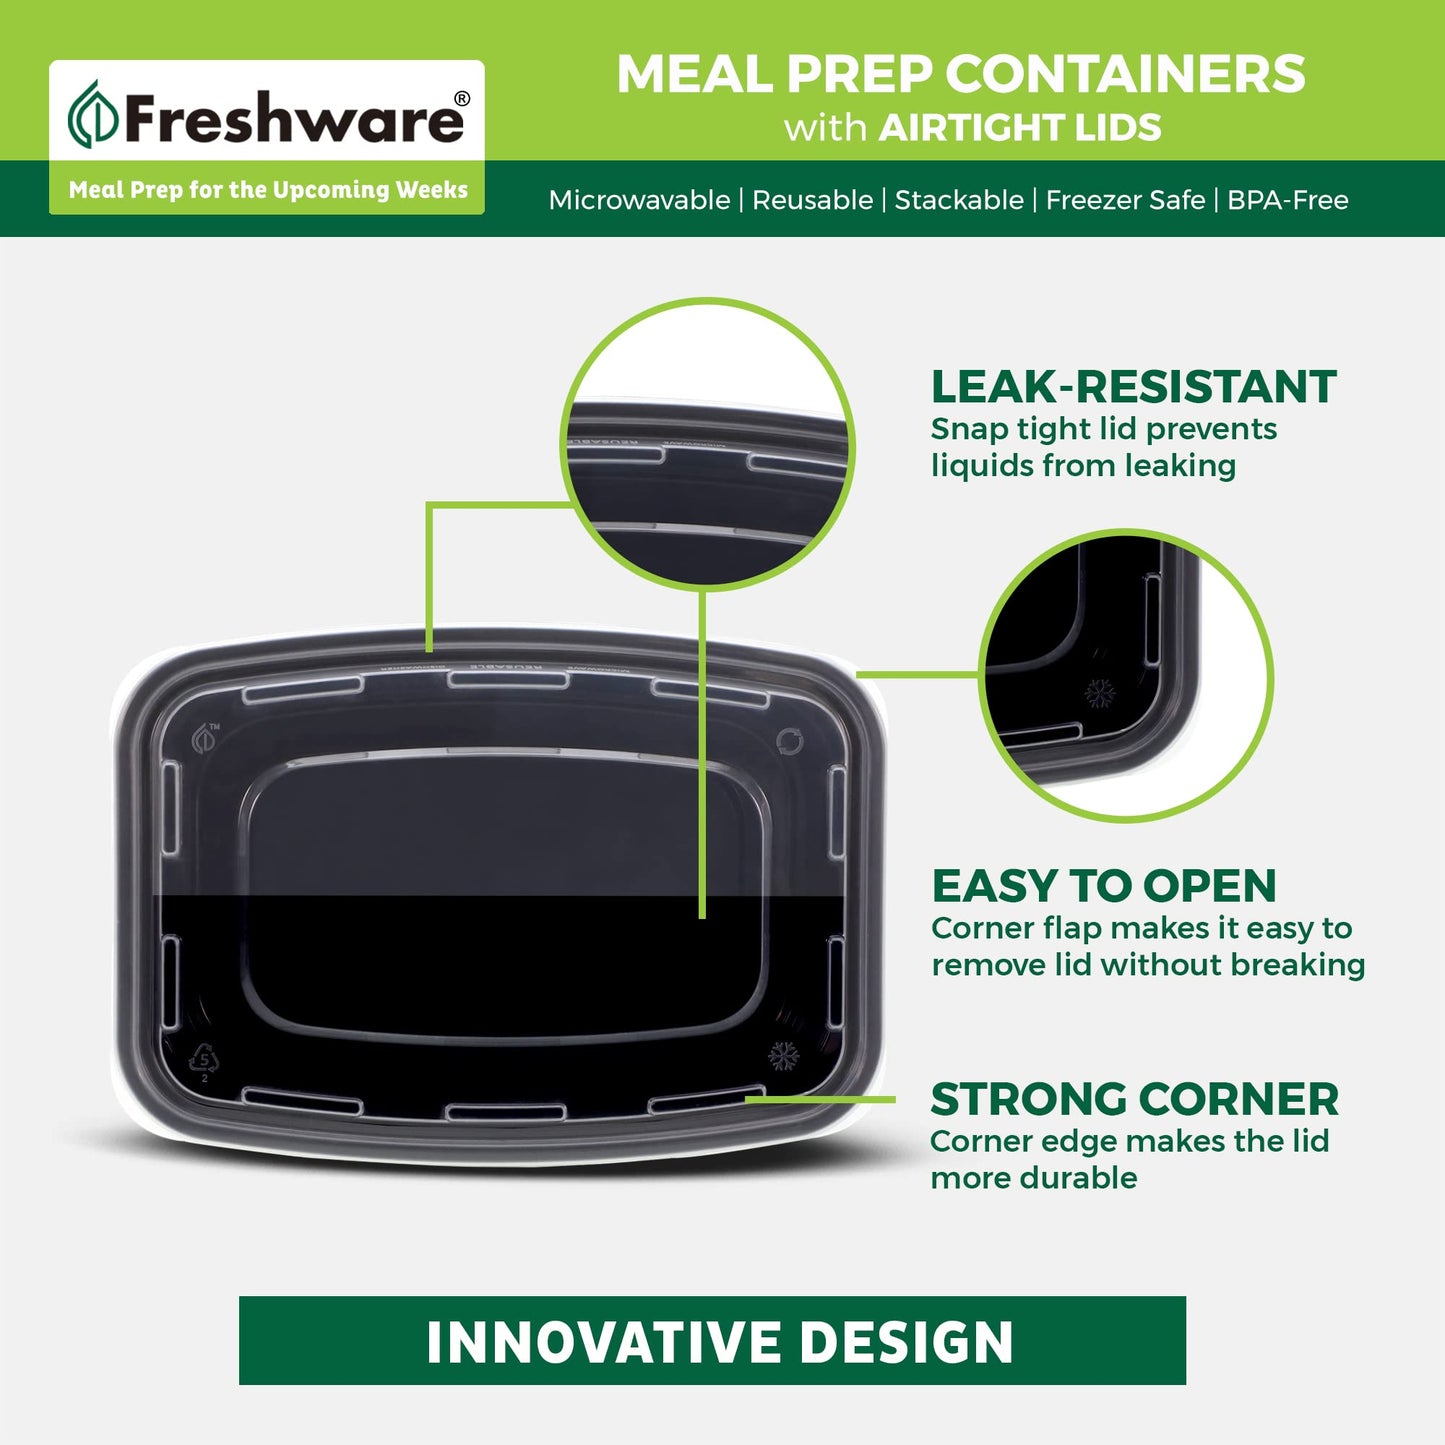 Freshware Meal Prep Containers [150 Pack] 1 Compartment Food Storage Containers with Lids, BPA Free, Microwave/Dishwasher/Freezer Safe (28 oz)